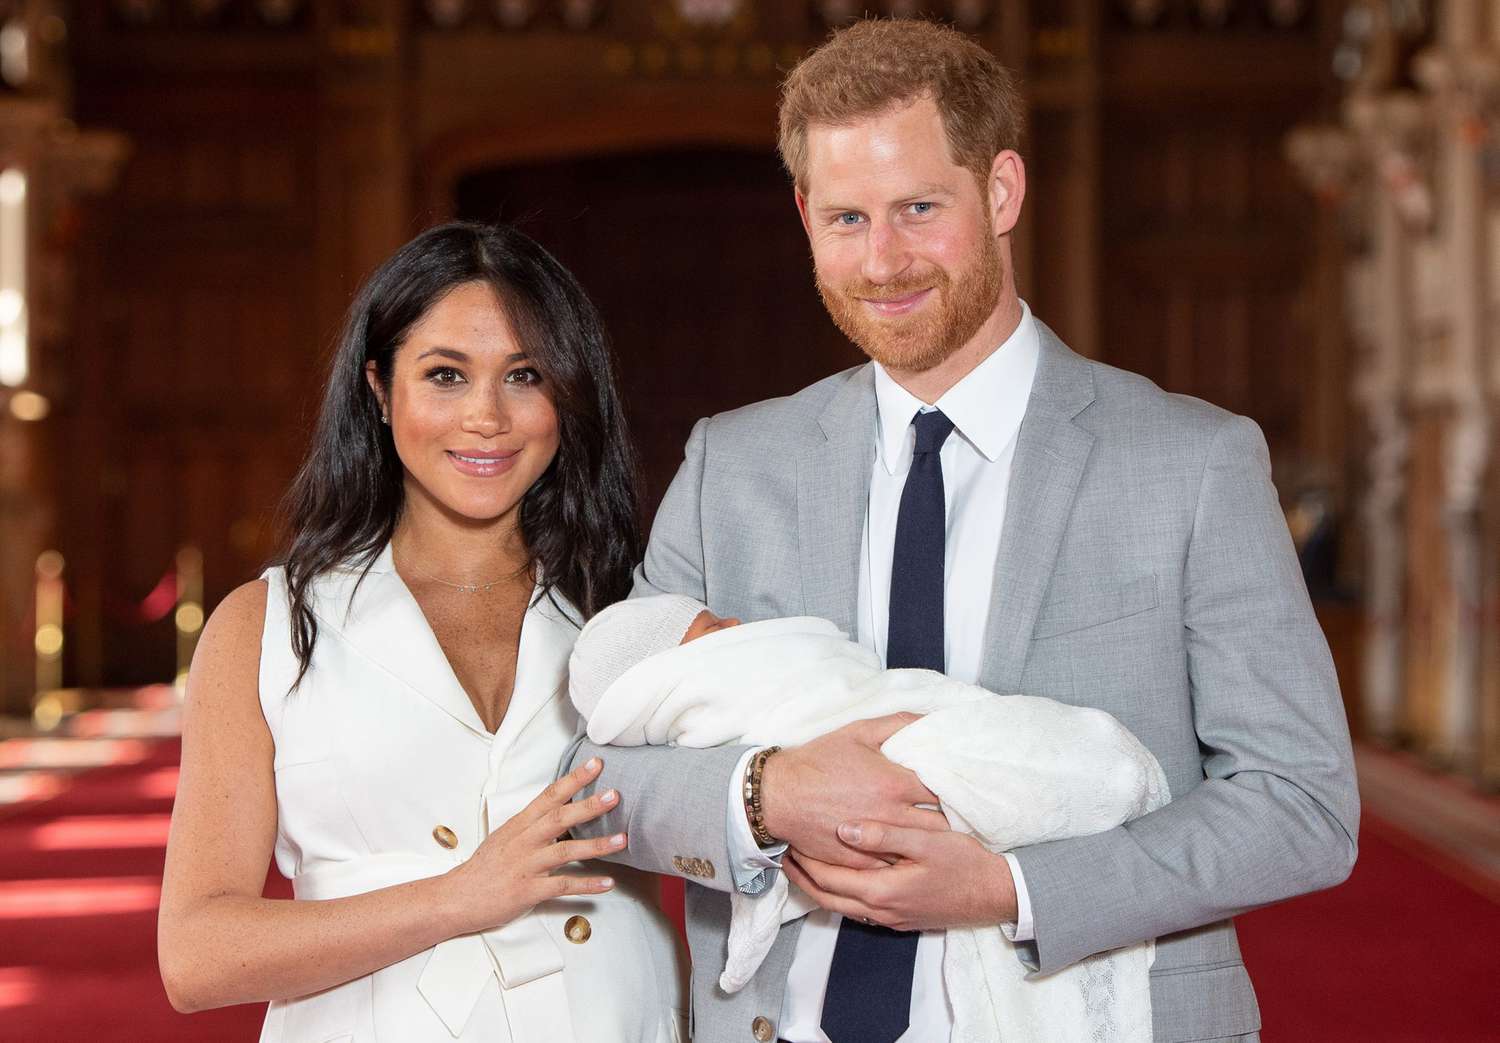 Prince Harry, Duke of Sussex and Meghan, Duchess of Sussex, pose with their newborn son Archie